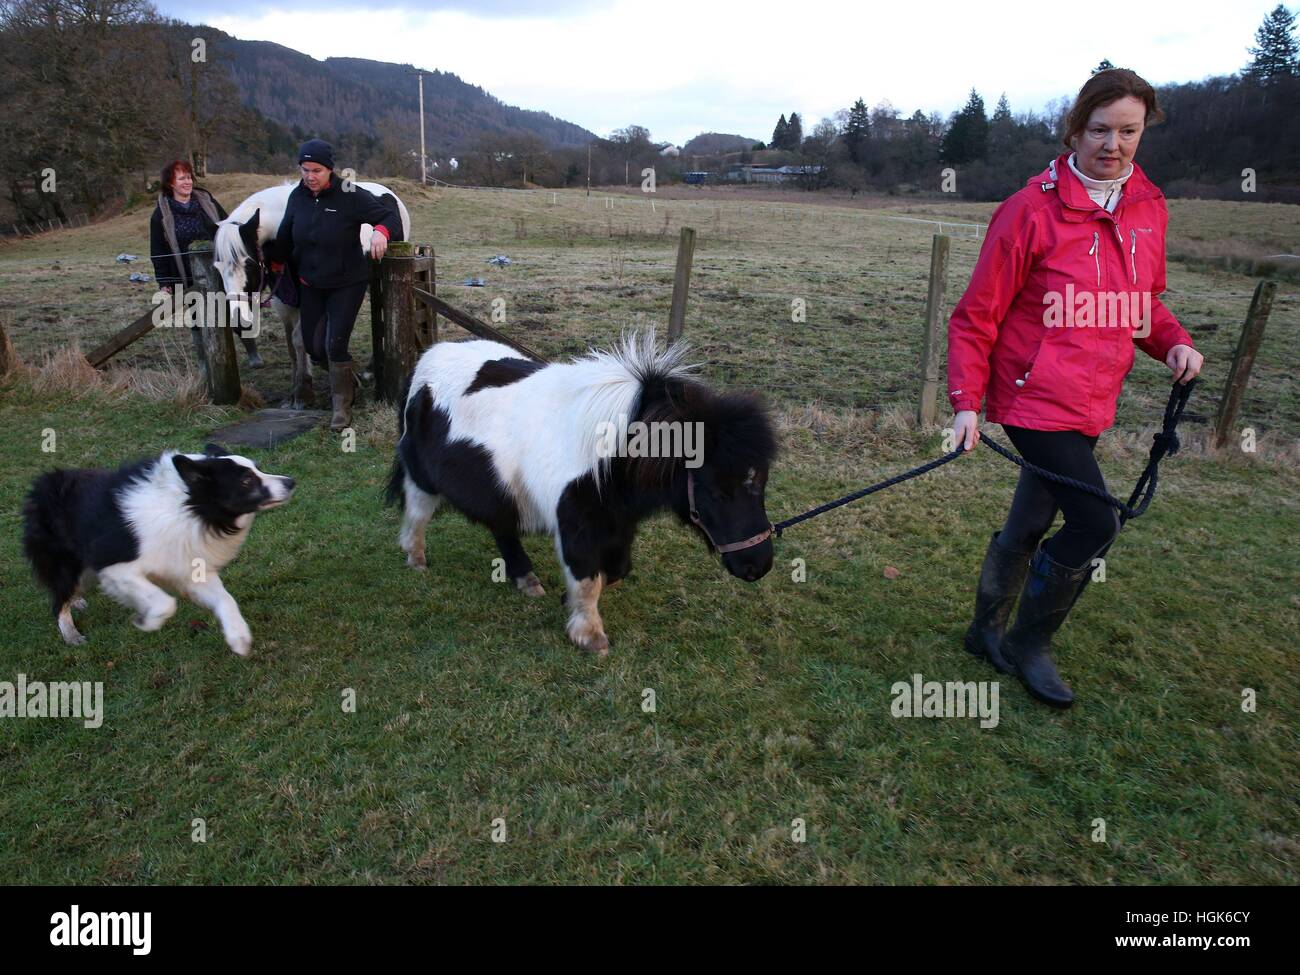 Nemo, a Shetland pony, rescued by the Scottish Fire and Rescue Service after it became stranded in a swollen river near Lochard Road, Aberfoyle, is pictured dried out back in his farm with Lynn Paterson(r) followed by her sister Kay Paterson with horse Nola after yesterdays ordeal. Stock Photo